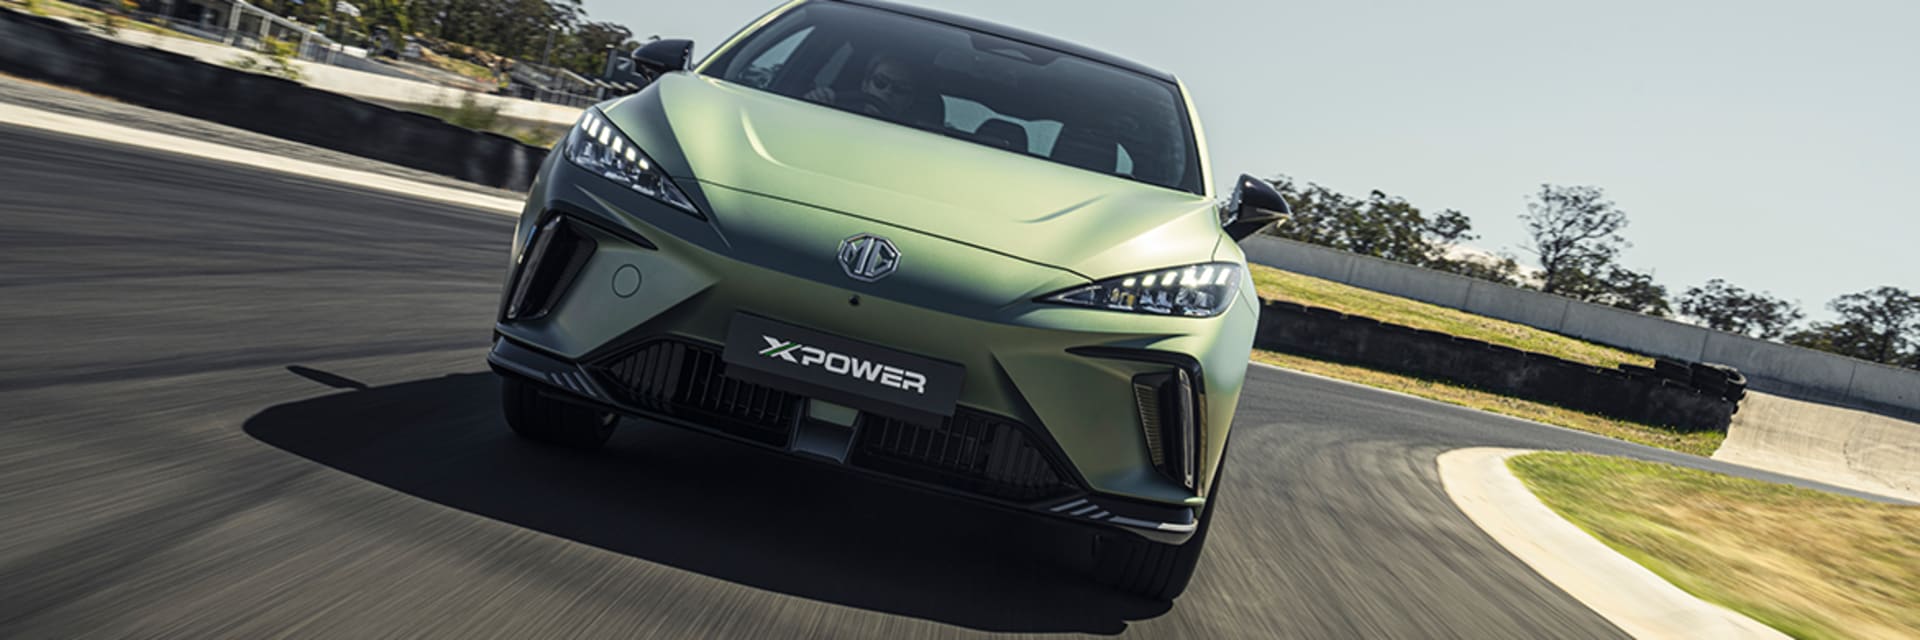 MG4 XPower Pricing News